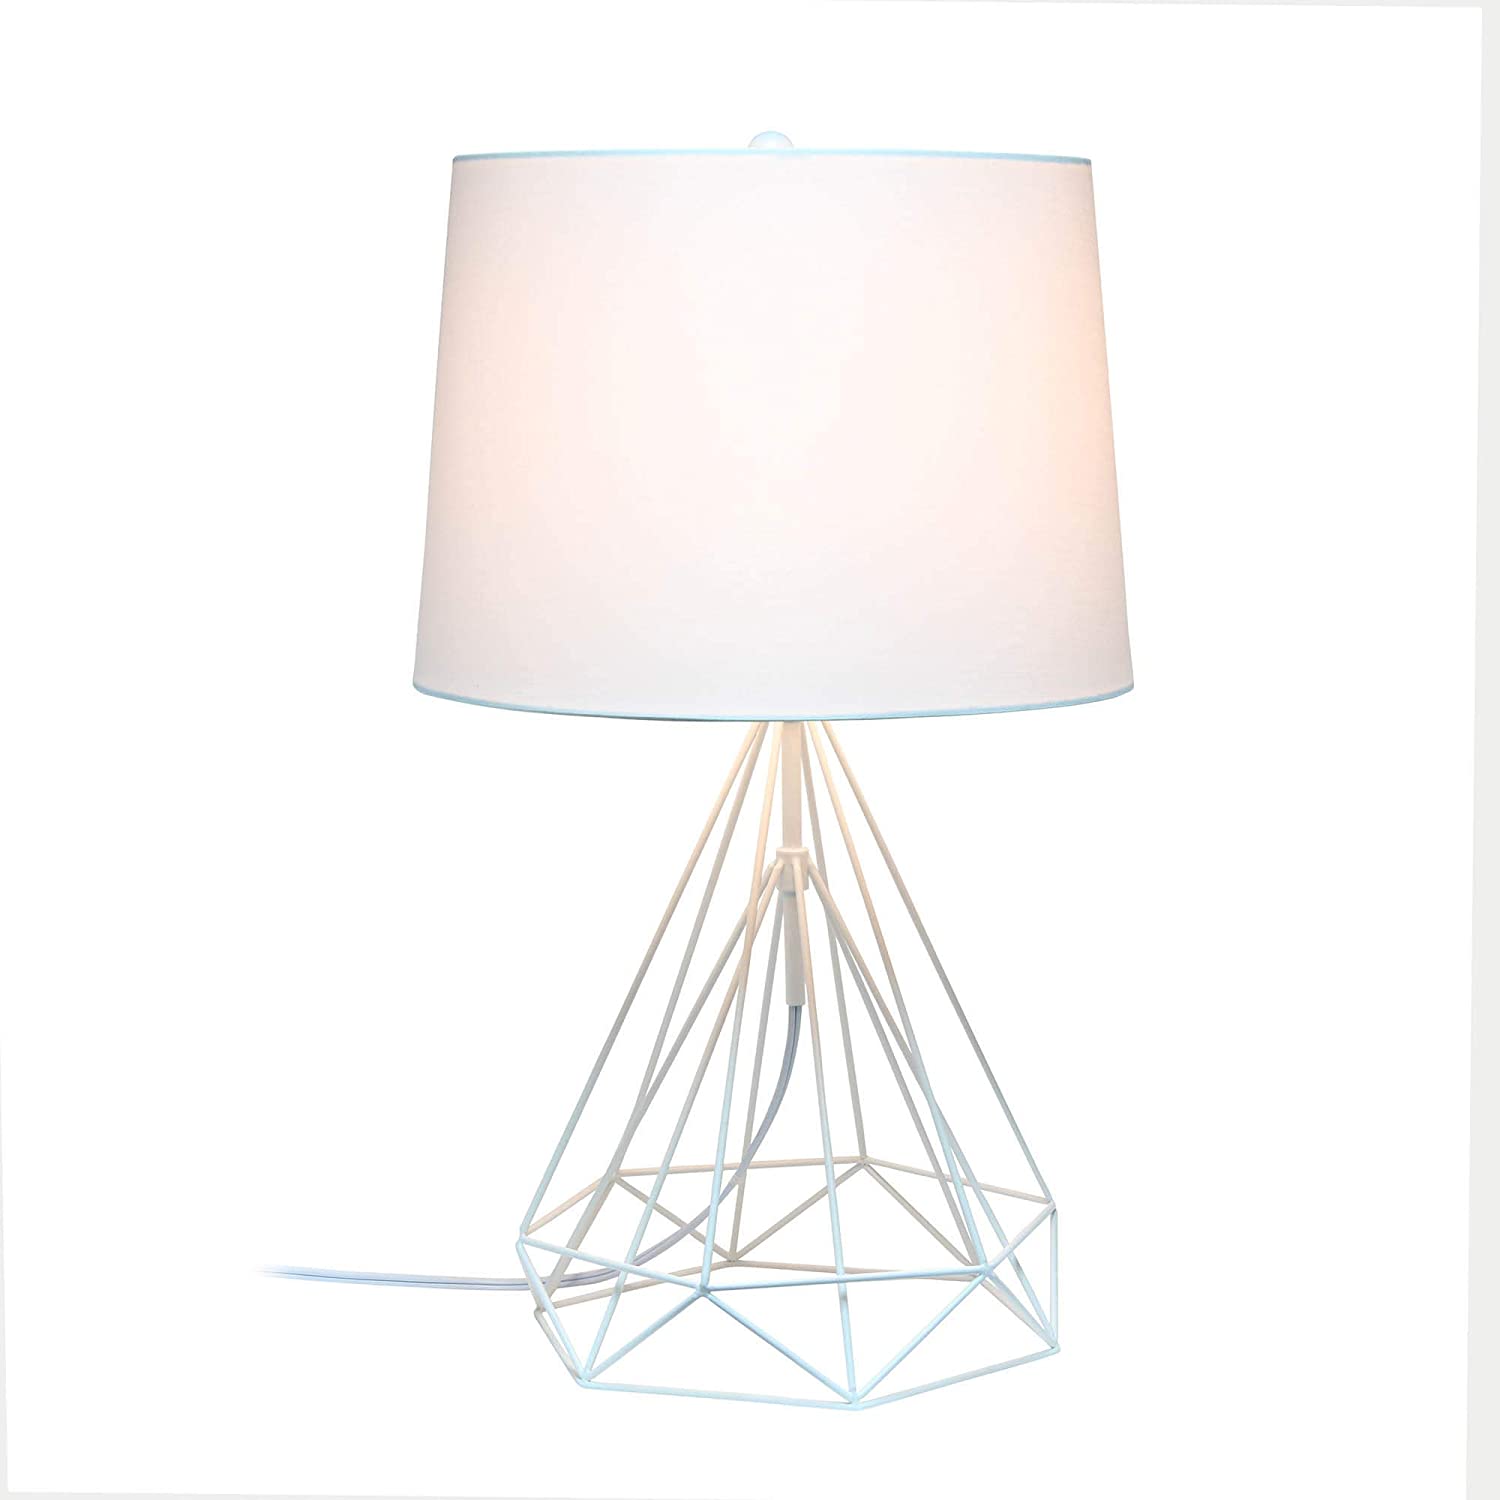 Lalia Home Decorative Geometric White Matte Wired Table Lamp with Fabric Shade